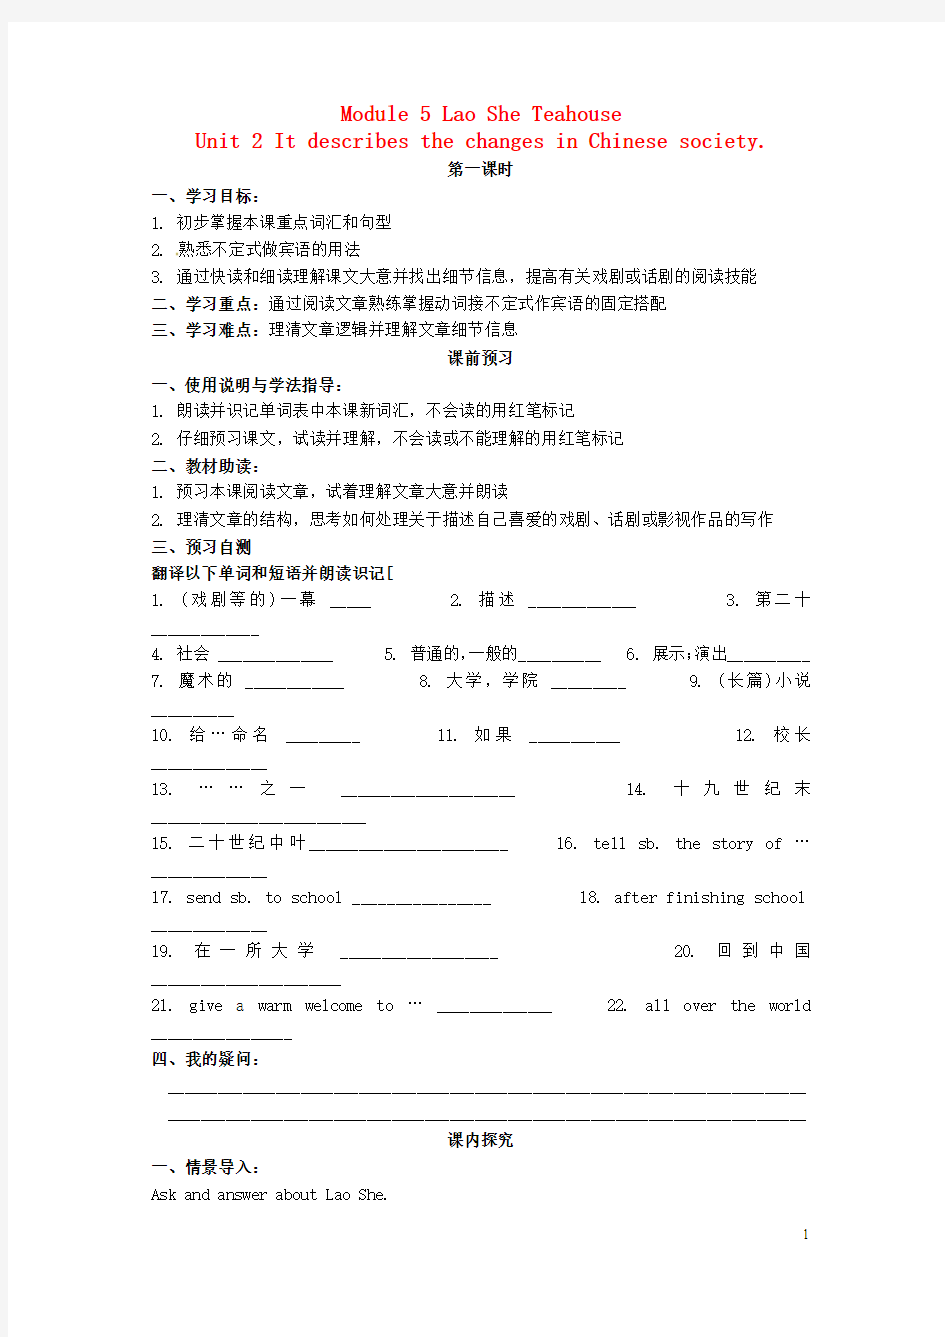 Module 5 Unit 2 It descibes the changes in Chinese society导学案